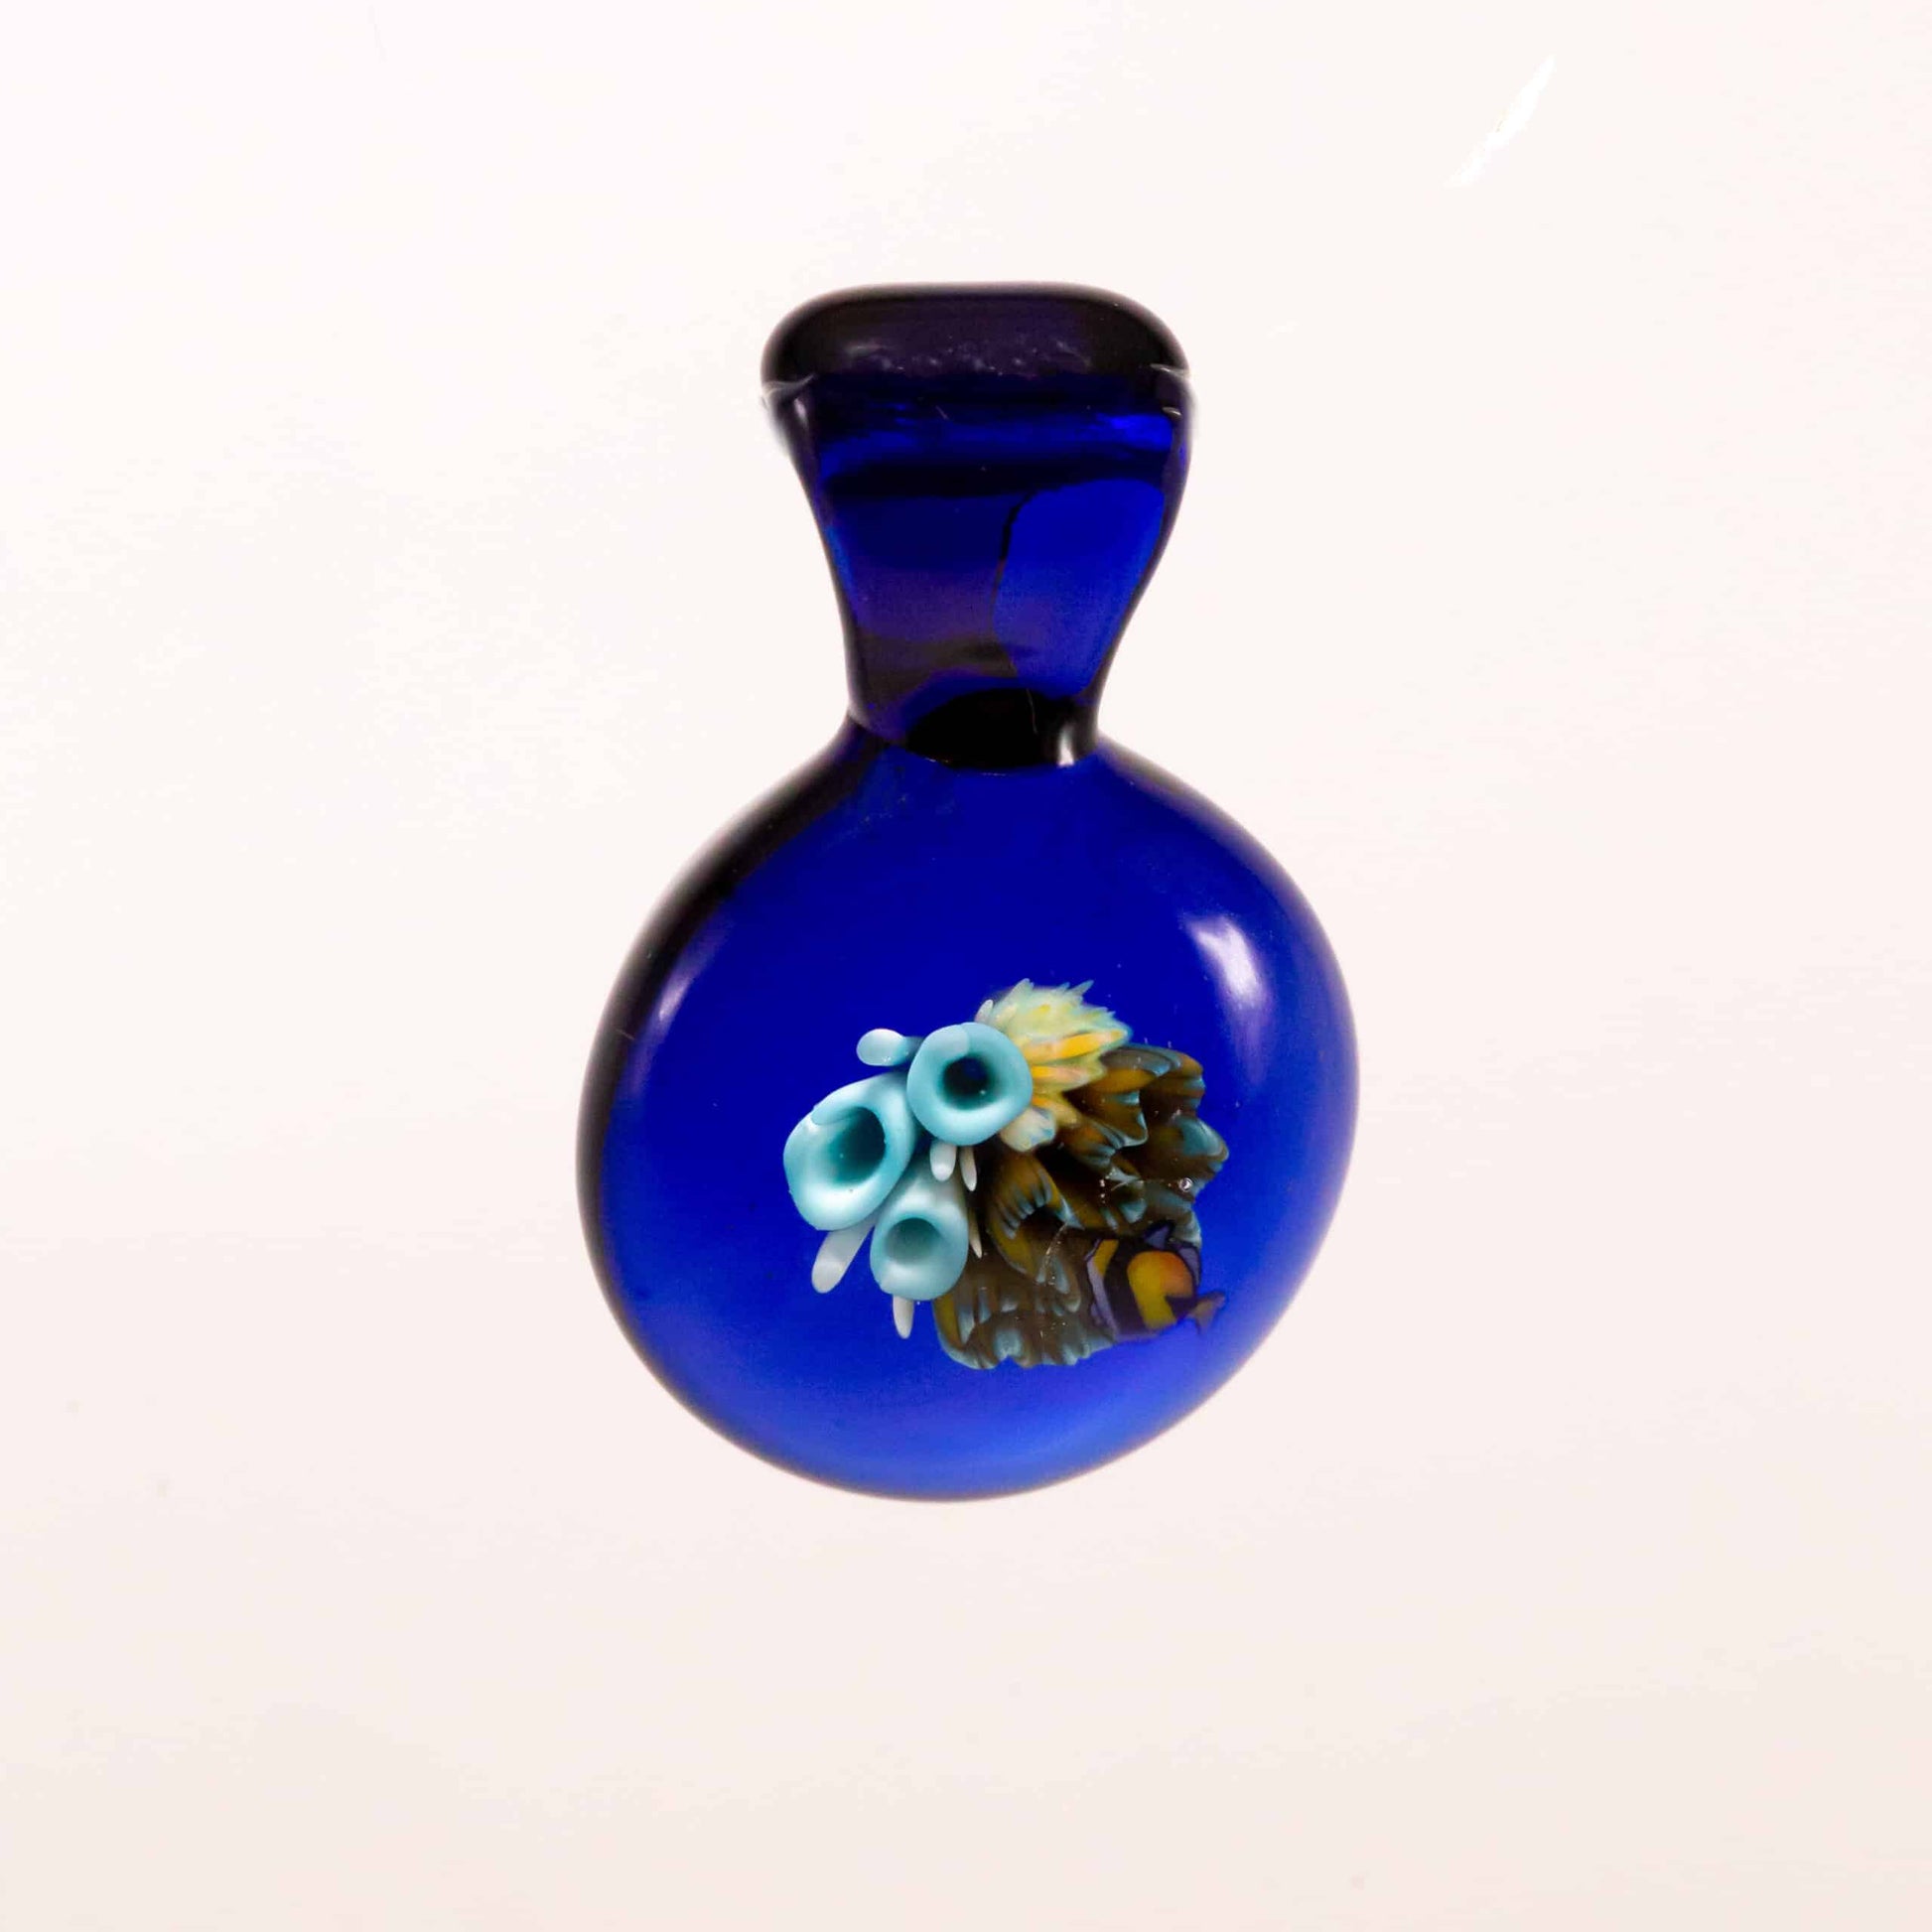 innovative glass pendant - Coral Reef Pendant (BLUE, YELLOW AND BLACK FISH) #11 BY KIMMO